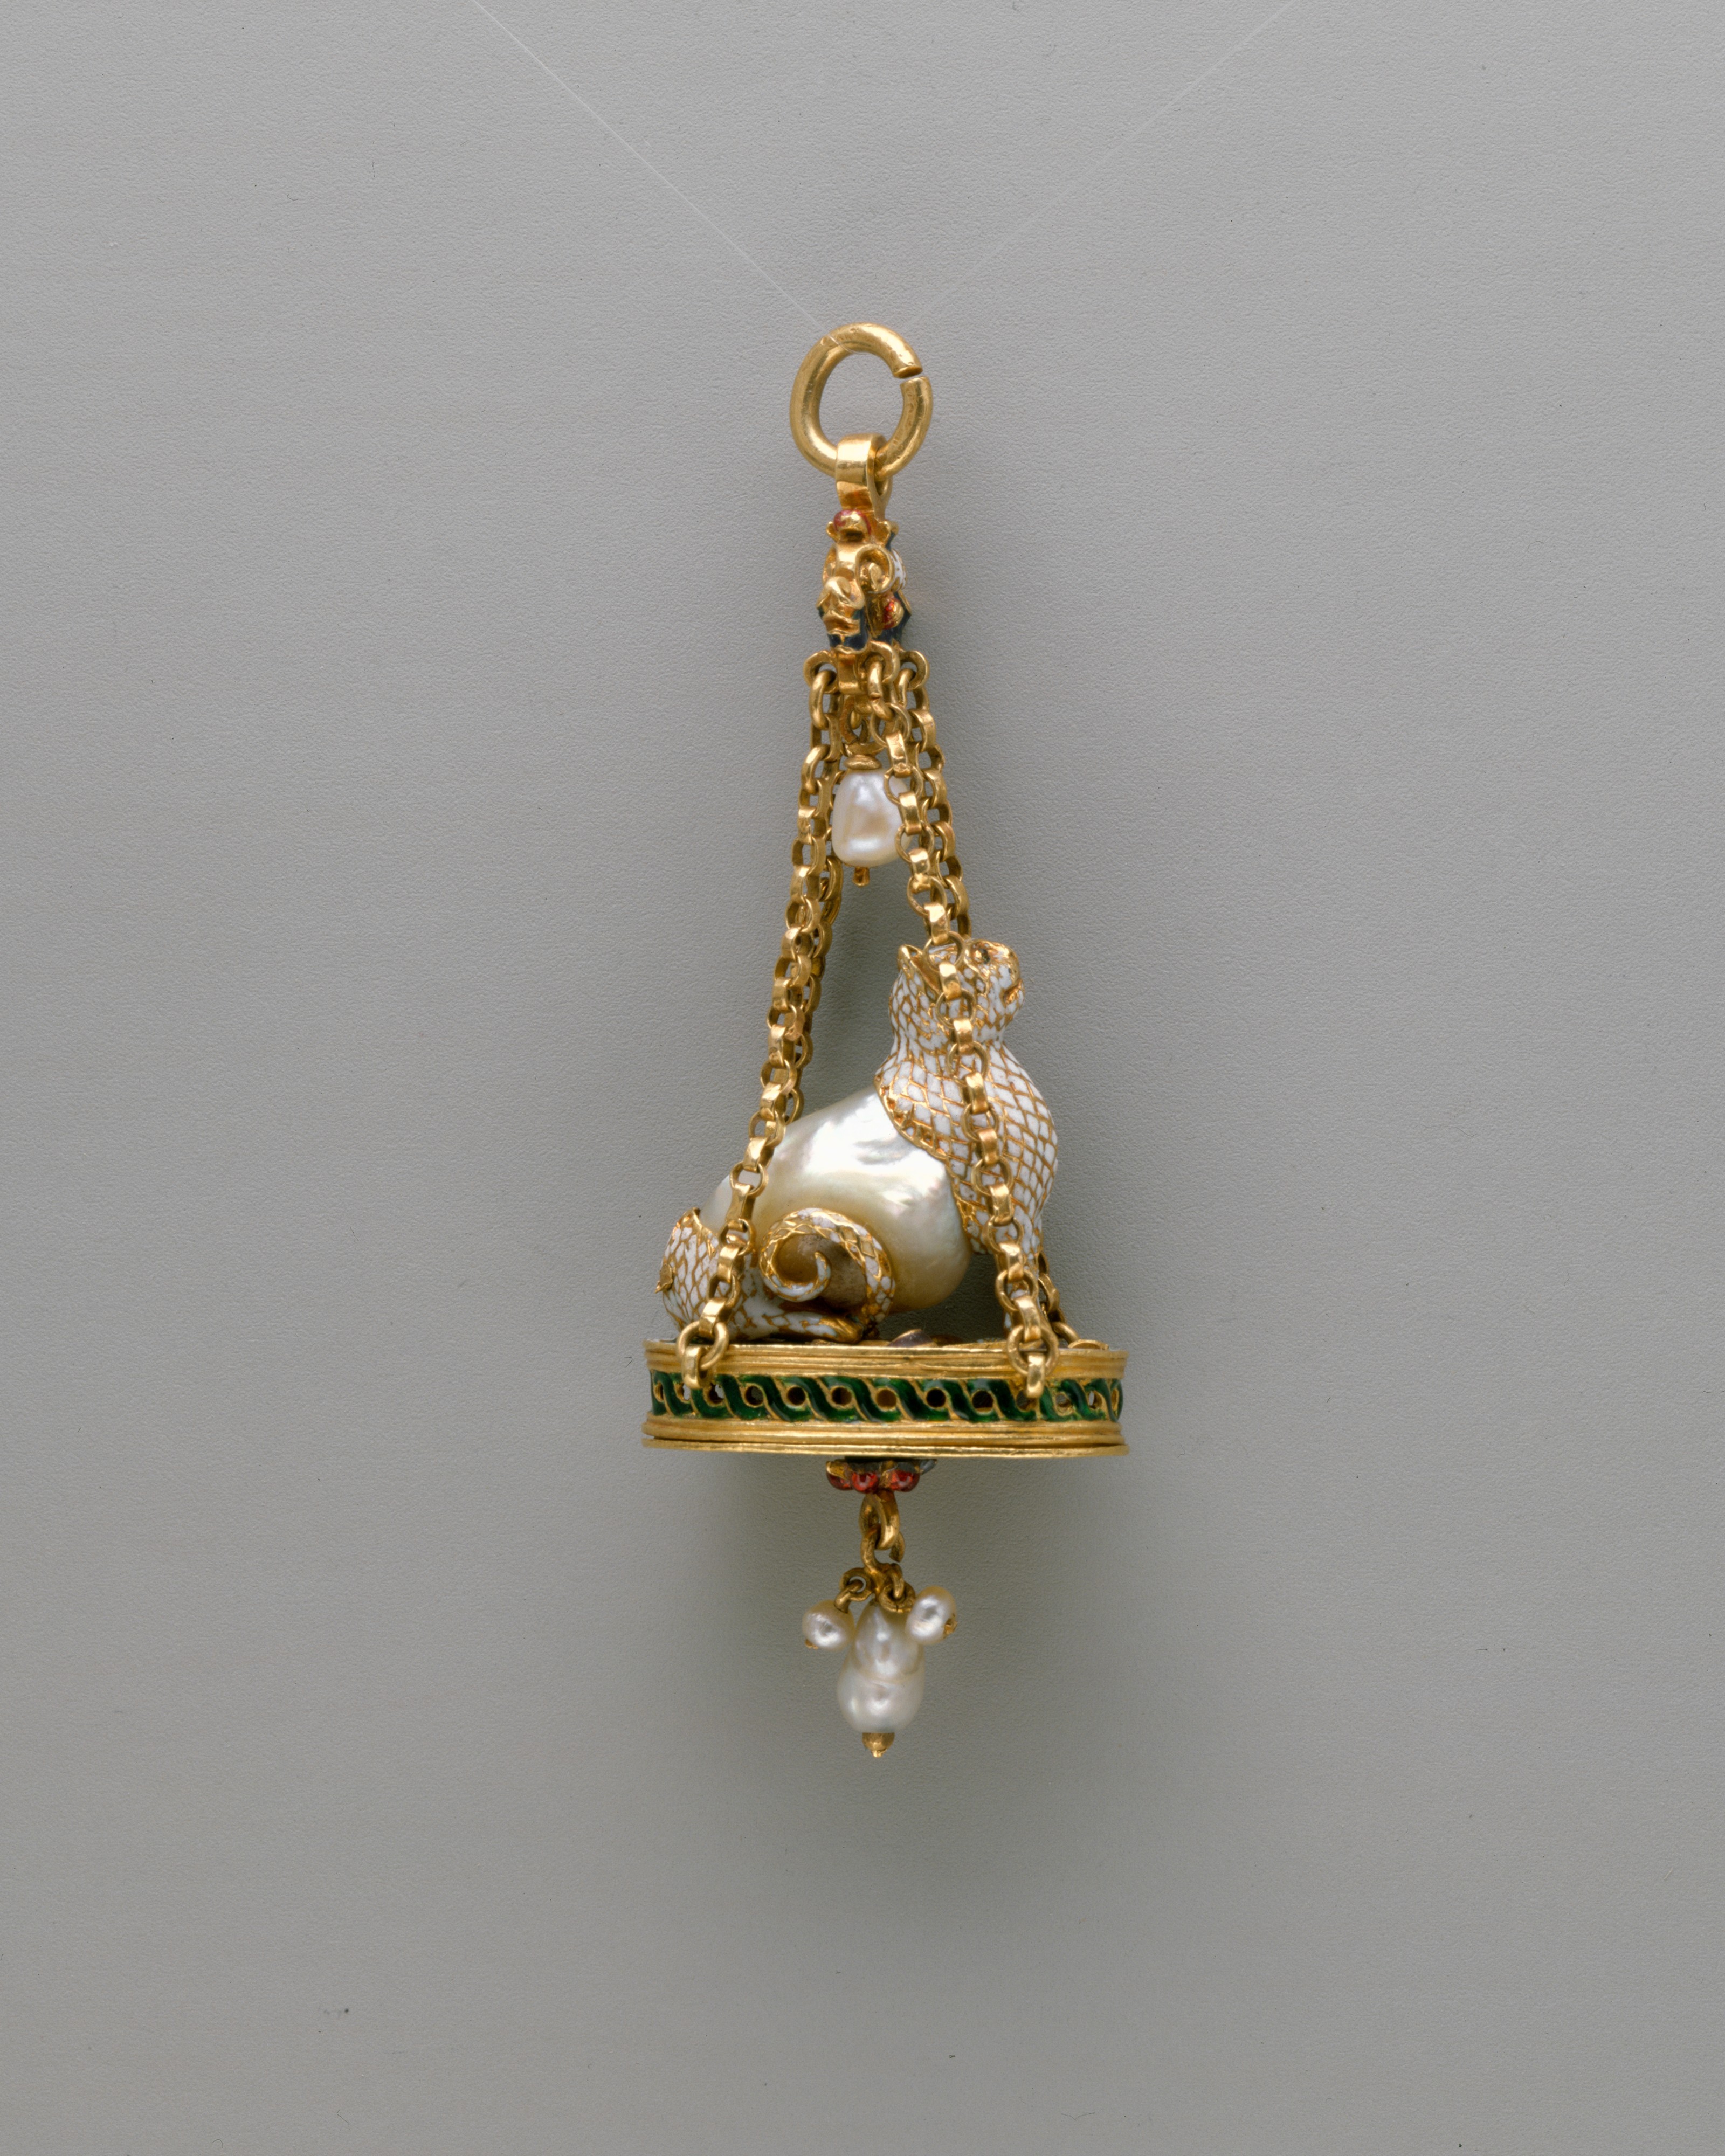 Pendant in the form of a seated cat by Unknown Artist - late 16th–early 17th century - 5.2 cm Metropolitan Museum of Art